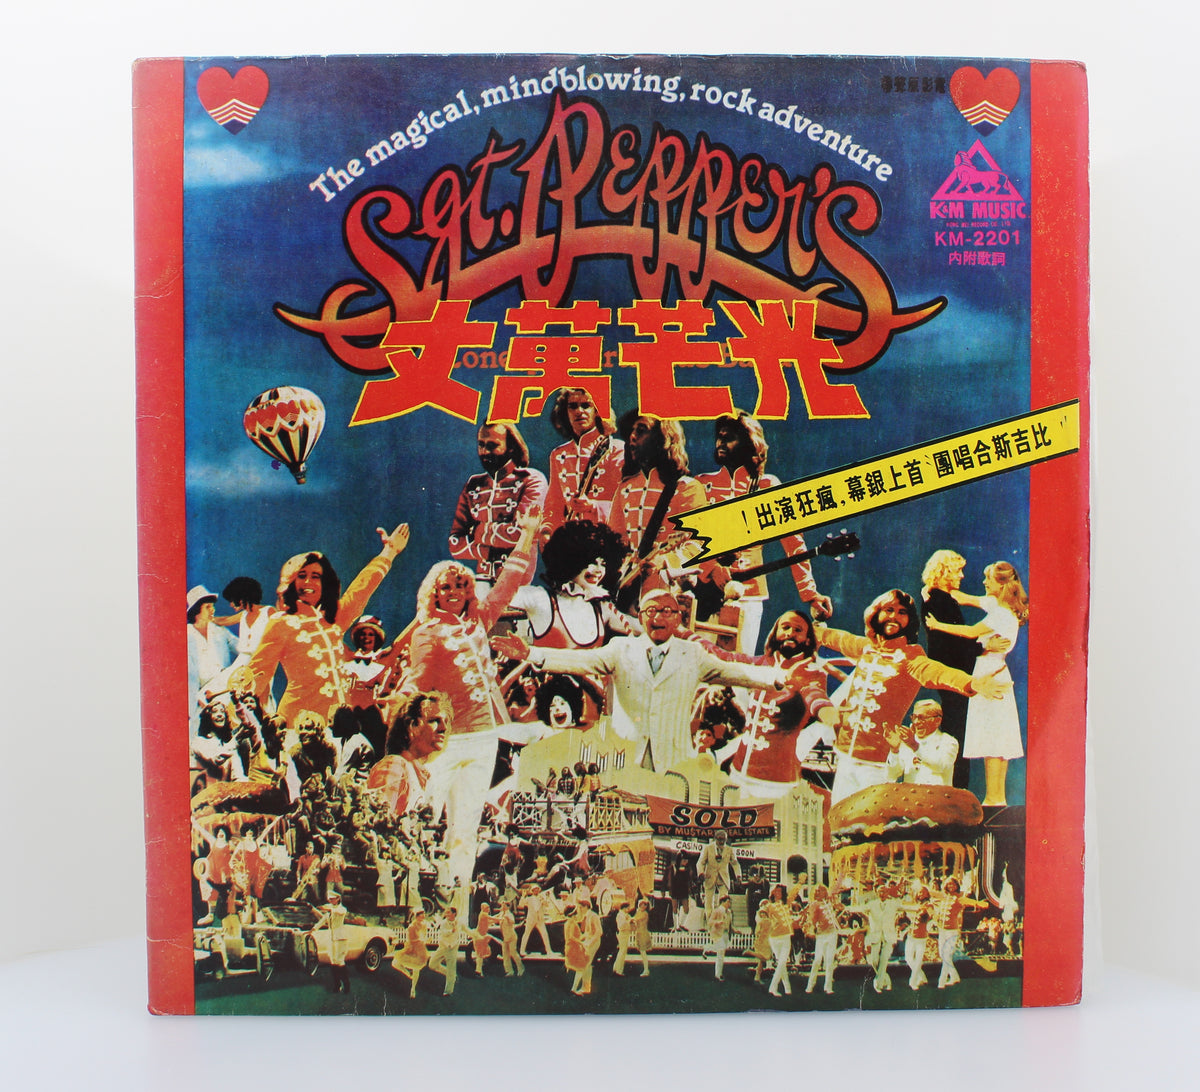 Bee Gees - Sgt Peppers Lonely Hearts Club Band, 2x Vinyl, Taiwan